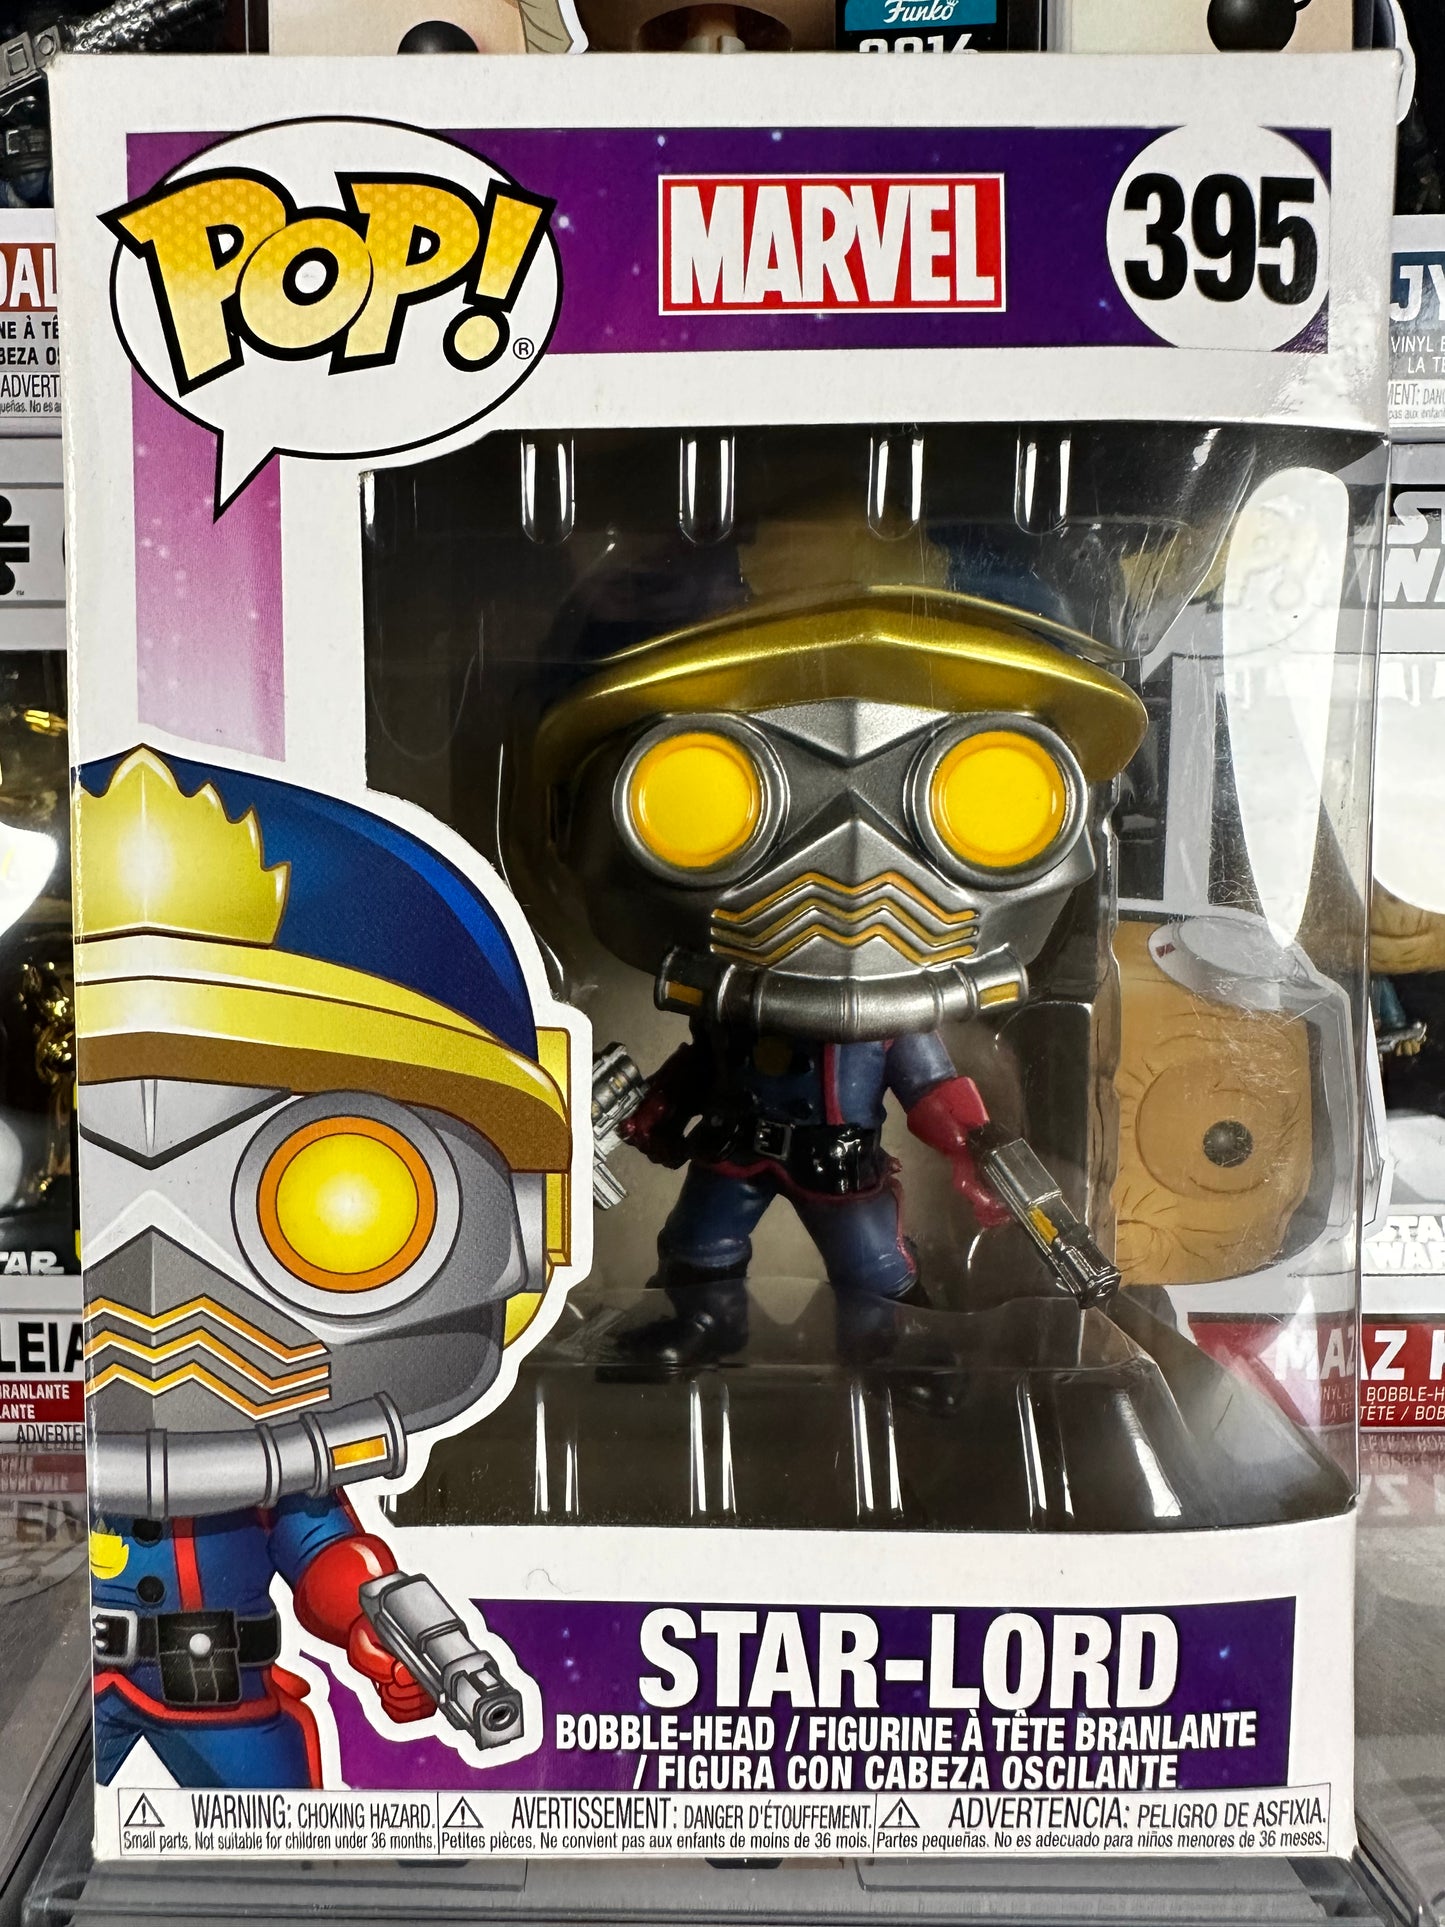 Marvel Guardians of the Galaxy - Star-Lord (Classic) (395) Vaulted